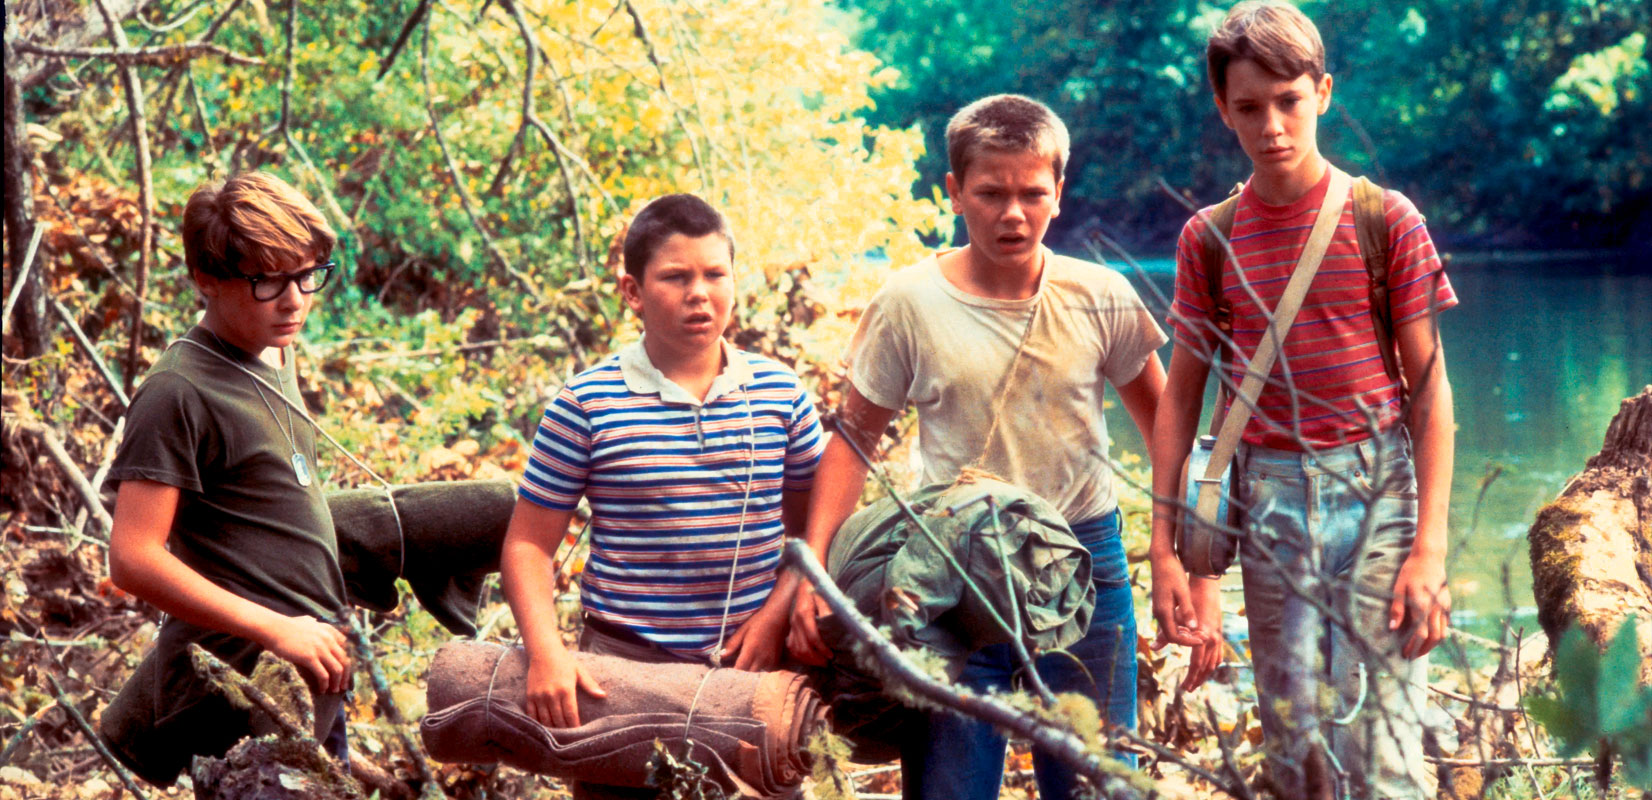 Stand By Me - Corey Feldman, Jerry O'Connell, River Phoenix, and Wil Wheaton